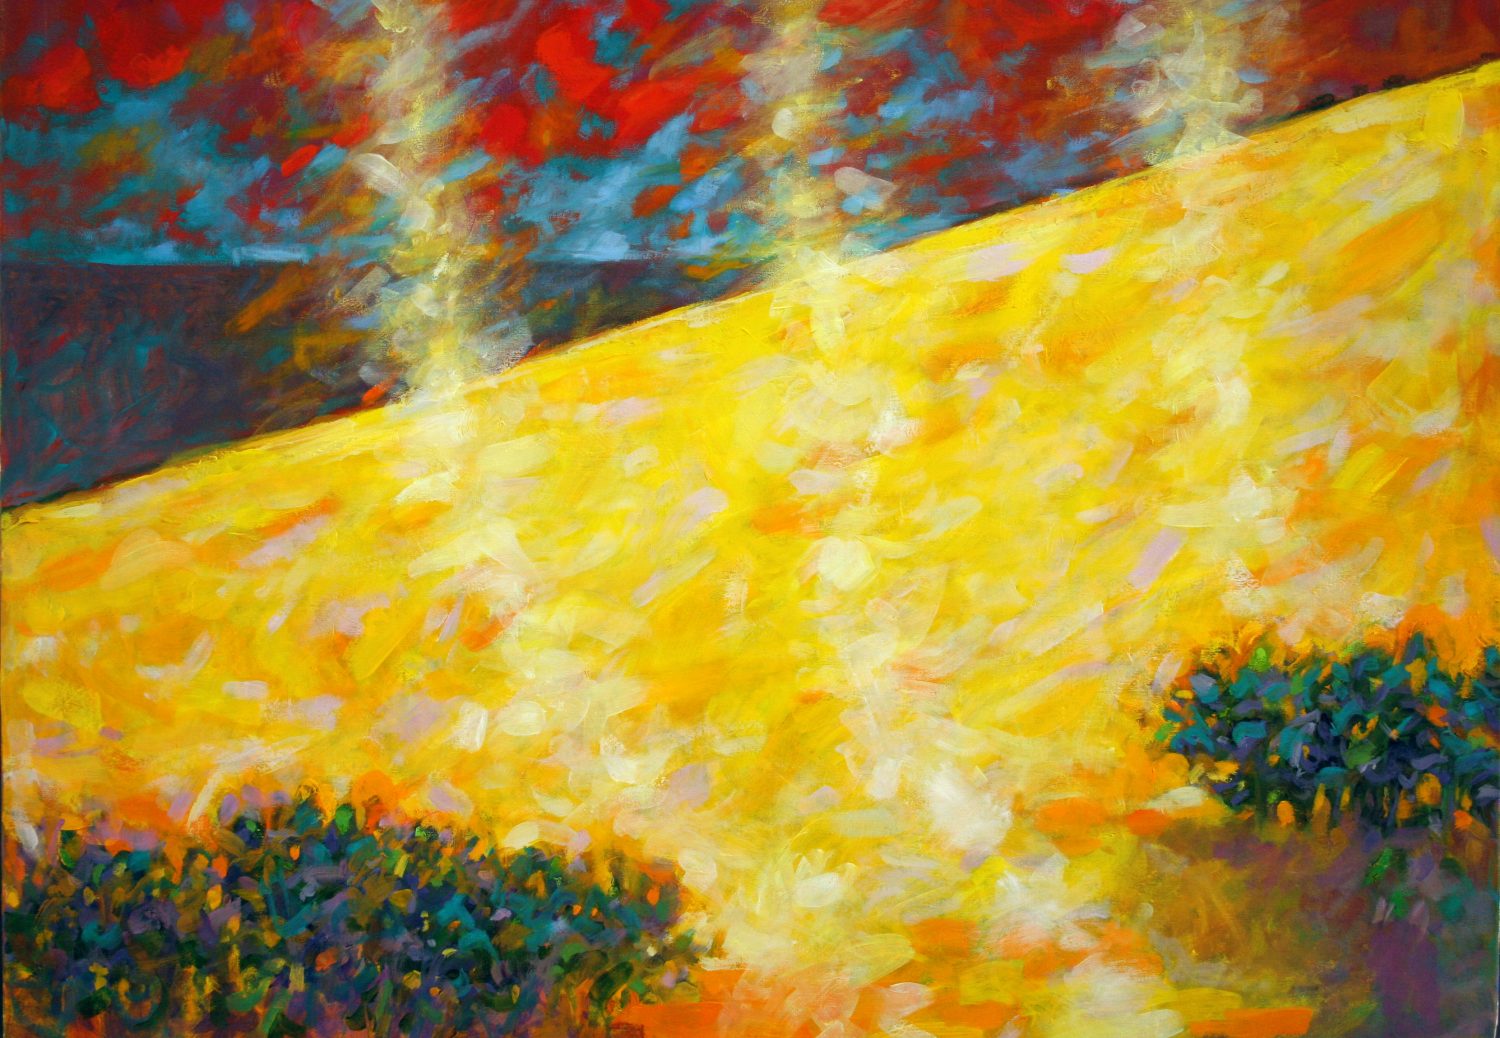 thumbnail of Hillside Seaside by american artist. medium: oil on canvas. dimensions: 30 x 40 inches. date: 2006